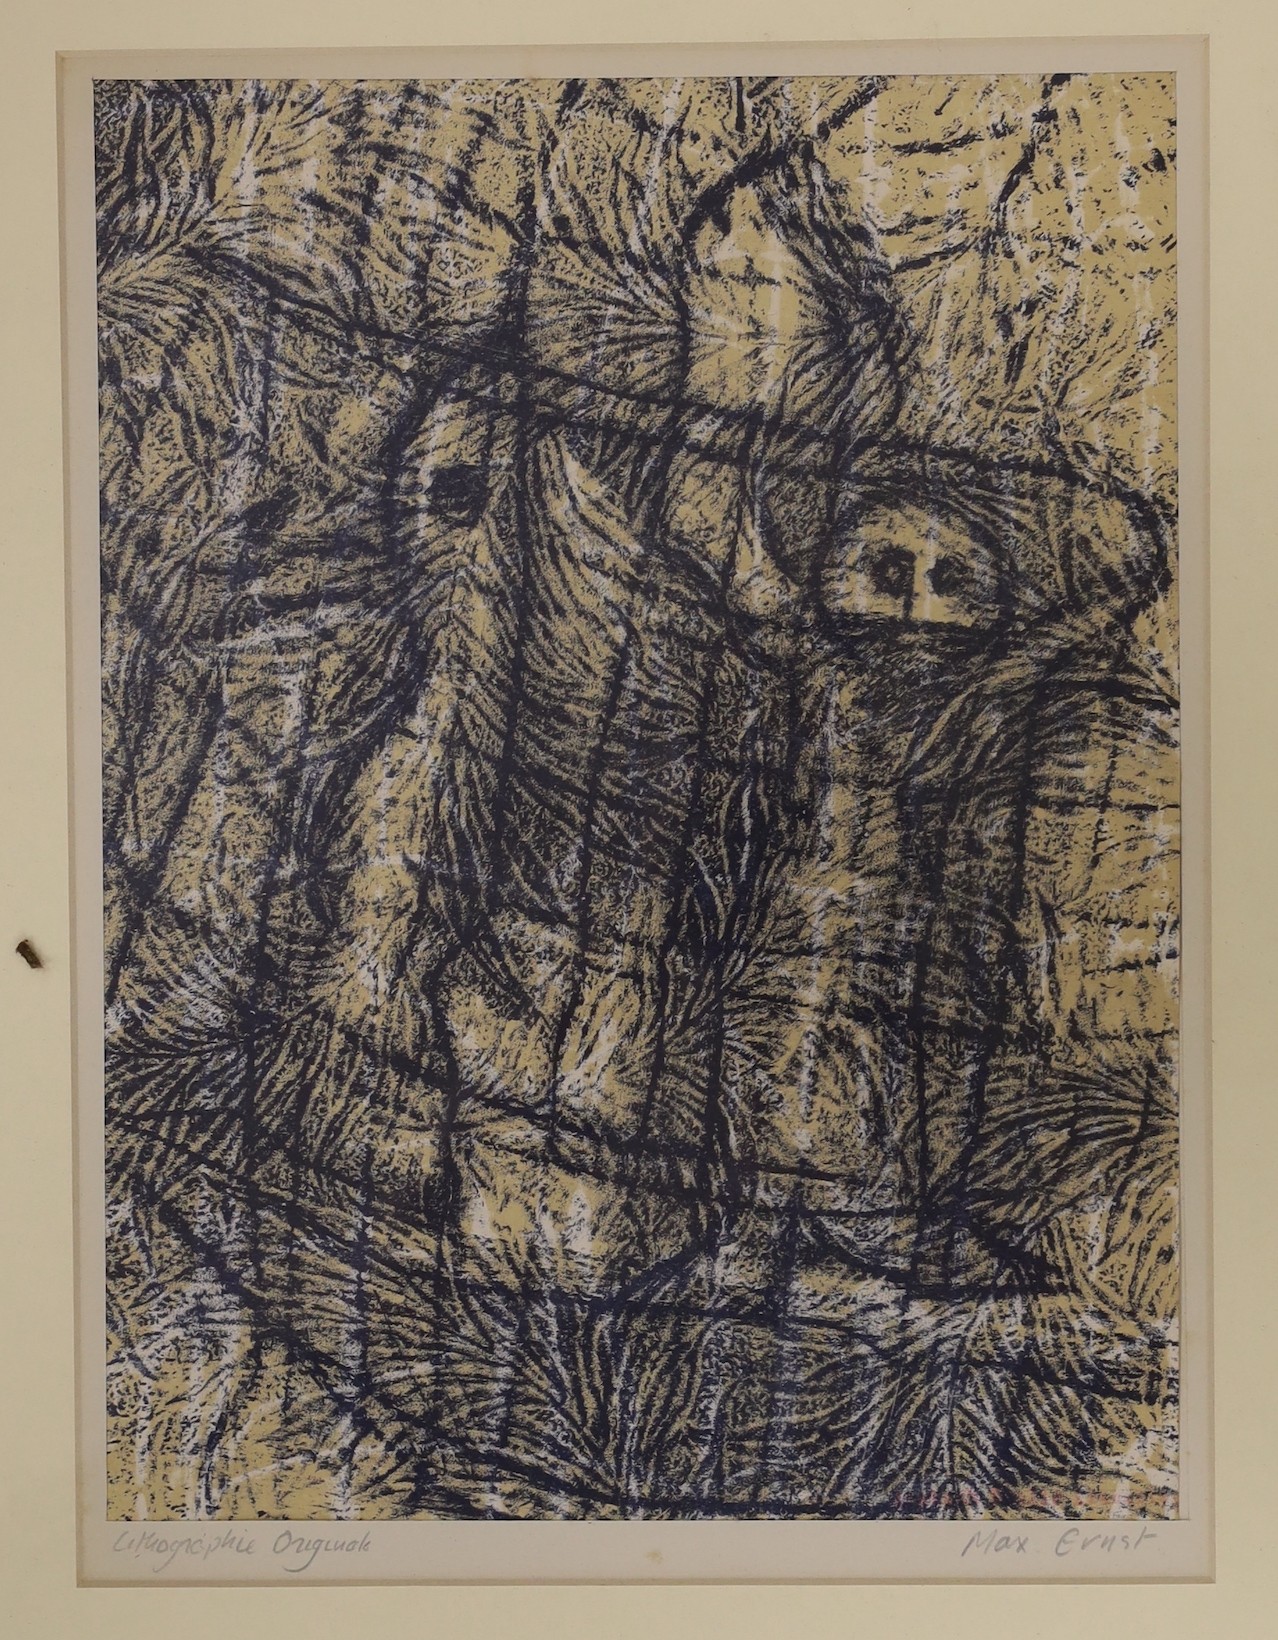 Max Ernst (1891-1976), colour lithograph, Chant d'amour, inscribed on the mount, 30 x 22.5cm